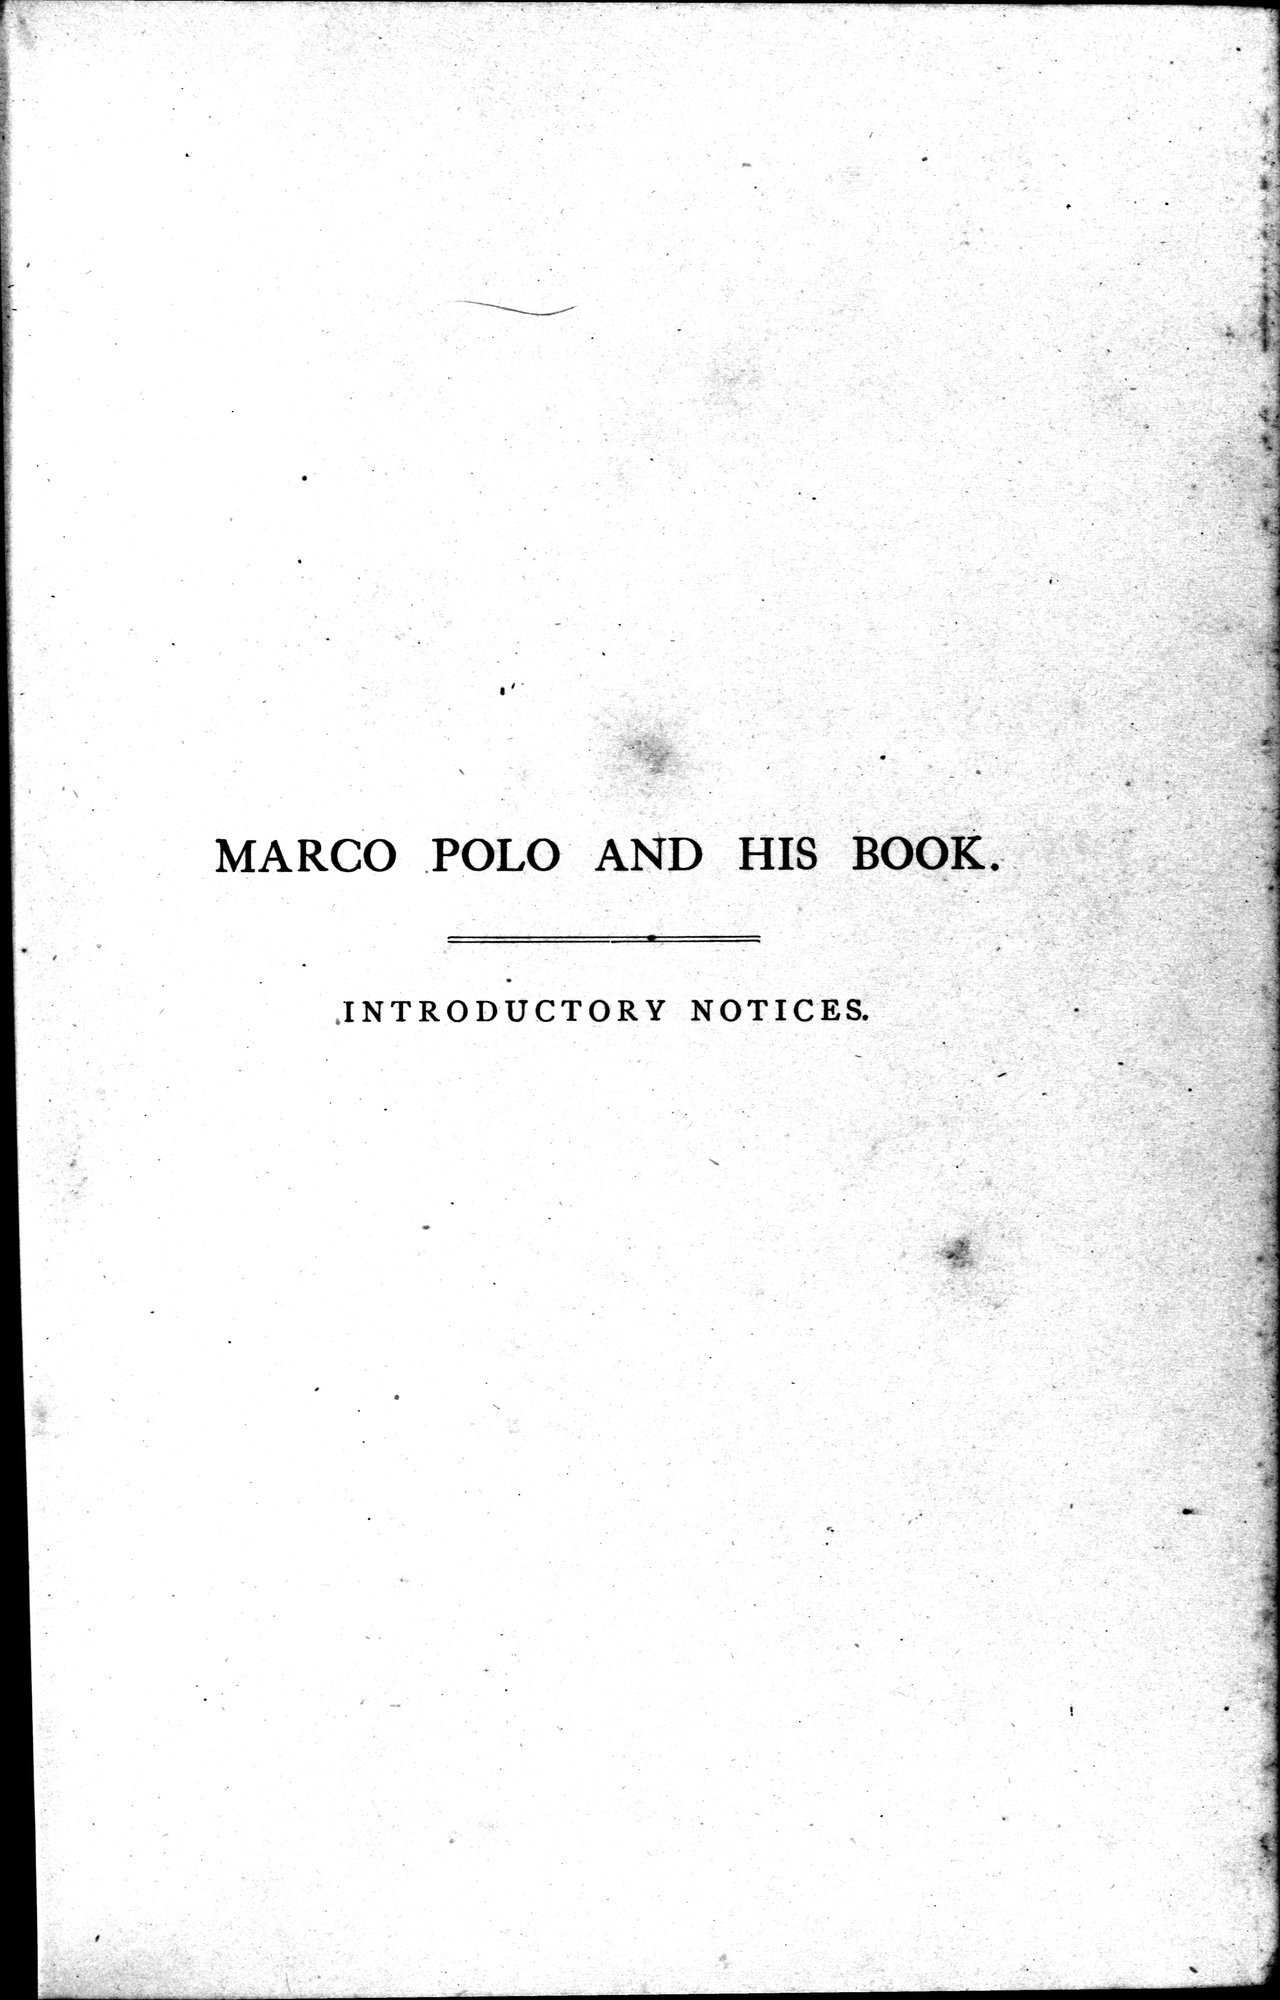 The Book of Ser Marco Polo : vol.1 / 111 ページ（白黒高解像度画像）